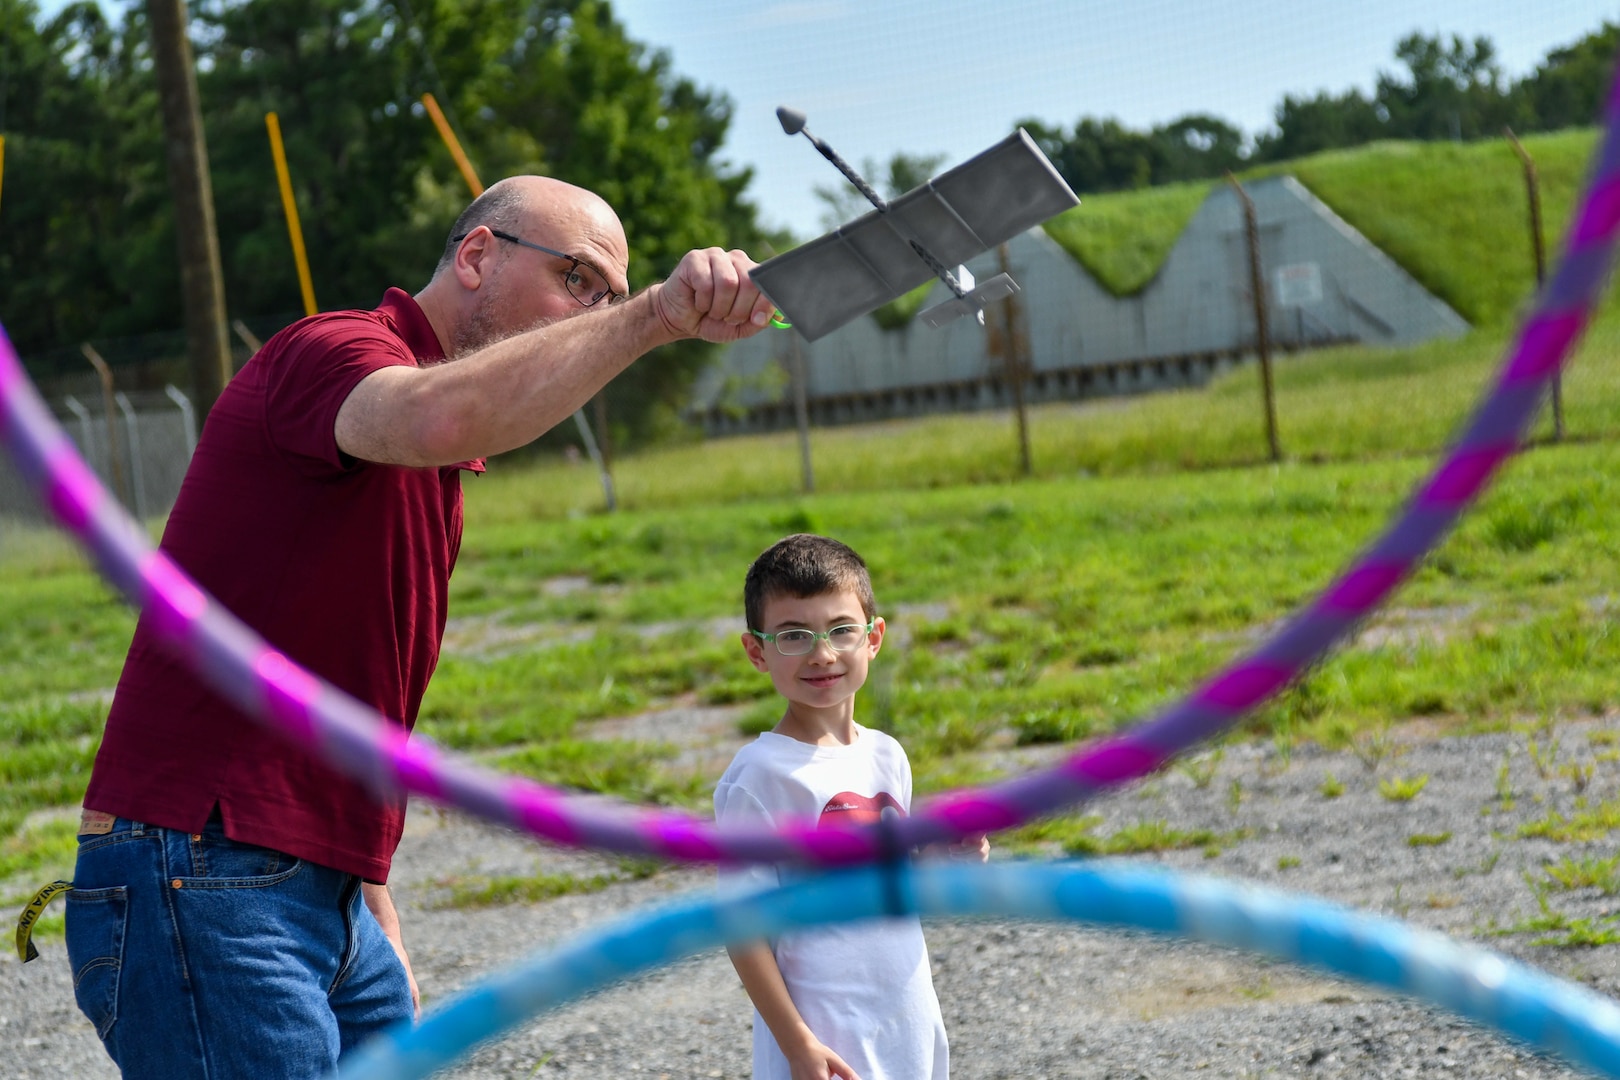 IMAGE: Strategic and Computing Systems Department Engineer Geoff Bland helps his son Miles, 7, launch their 3D-printed rubber band-powered airplane at a pair of target hoops at the Weapons Control and Integration Department’s station. The station was one of many activities available to the children of Dahlgren personnel during the Bring Your Child to Work Day event Aug. 2.